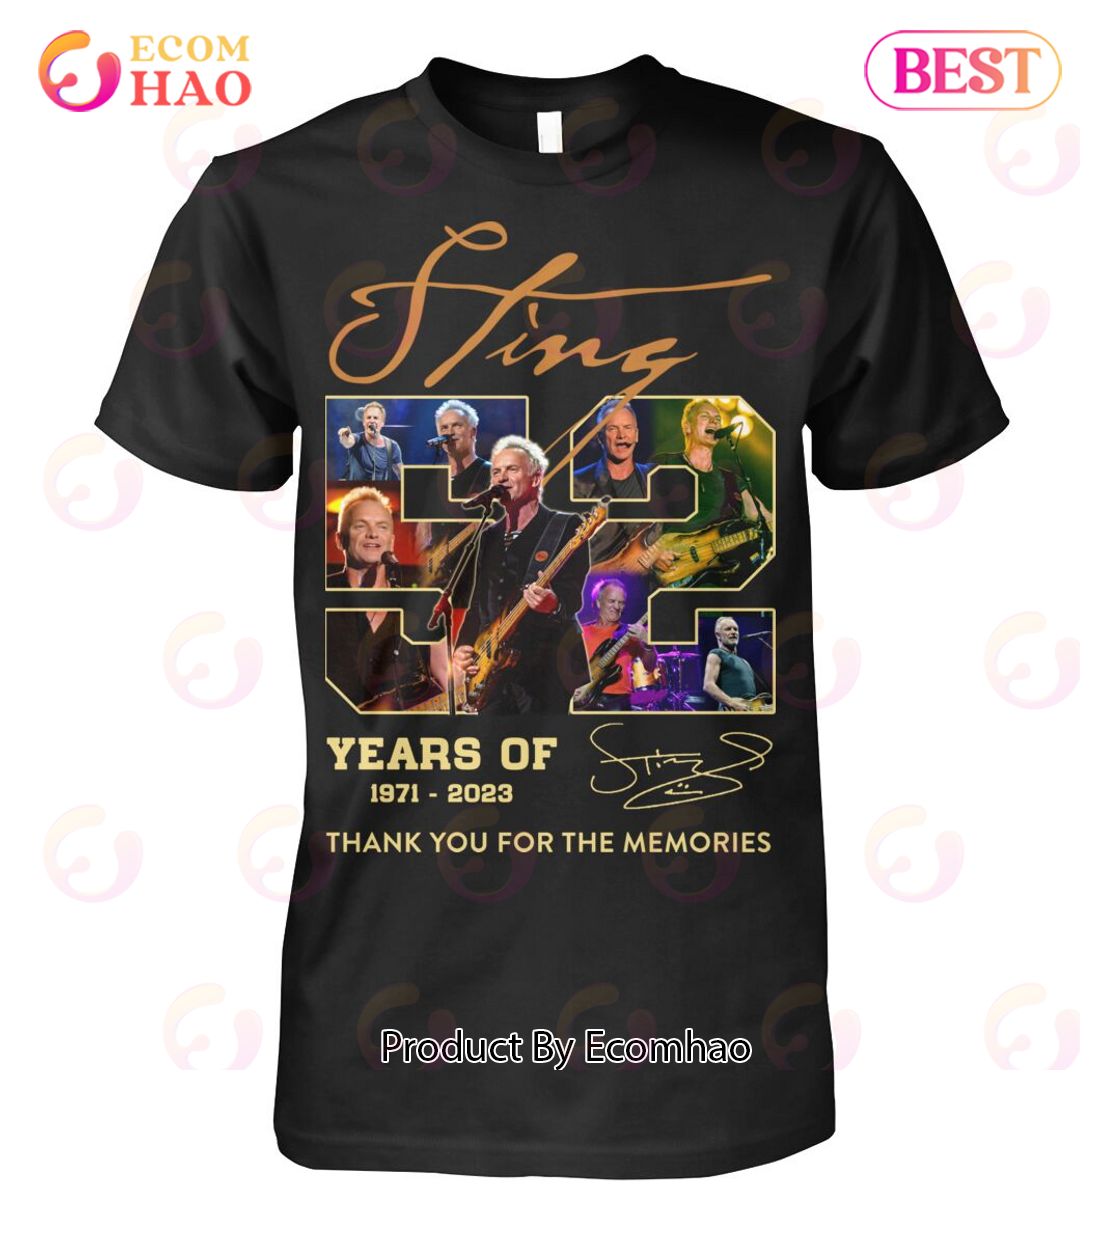 Sting 52 Years Of 1971 - 2023 Thank You For The Memories T-Shirt